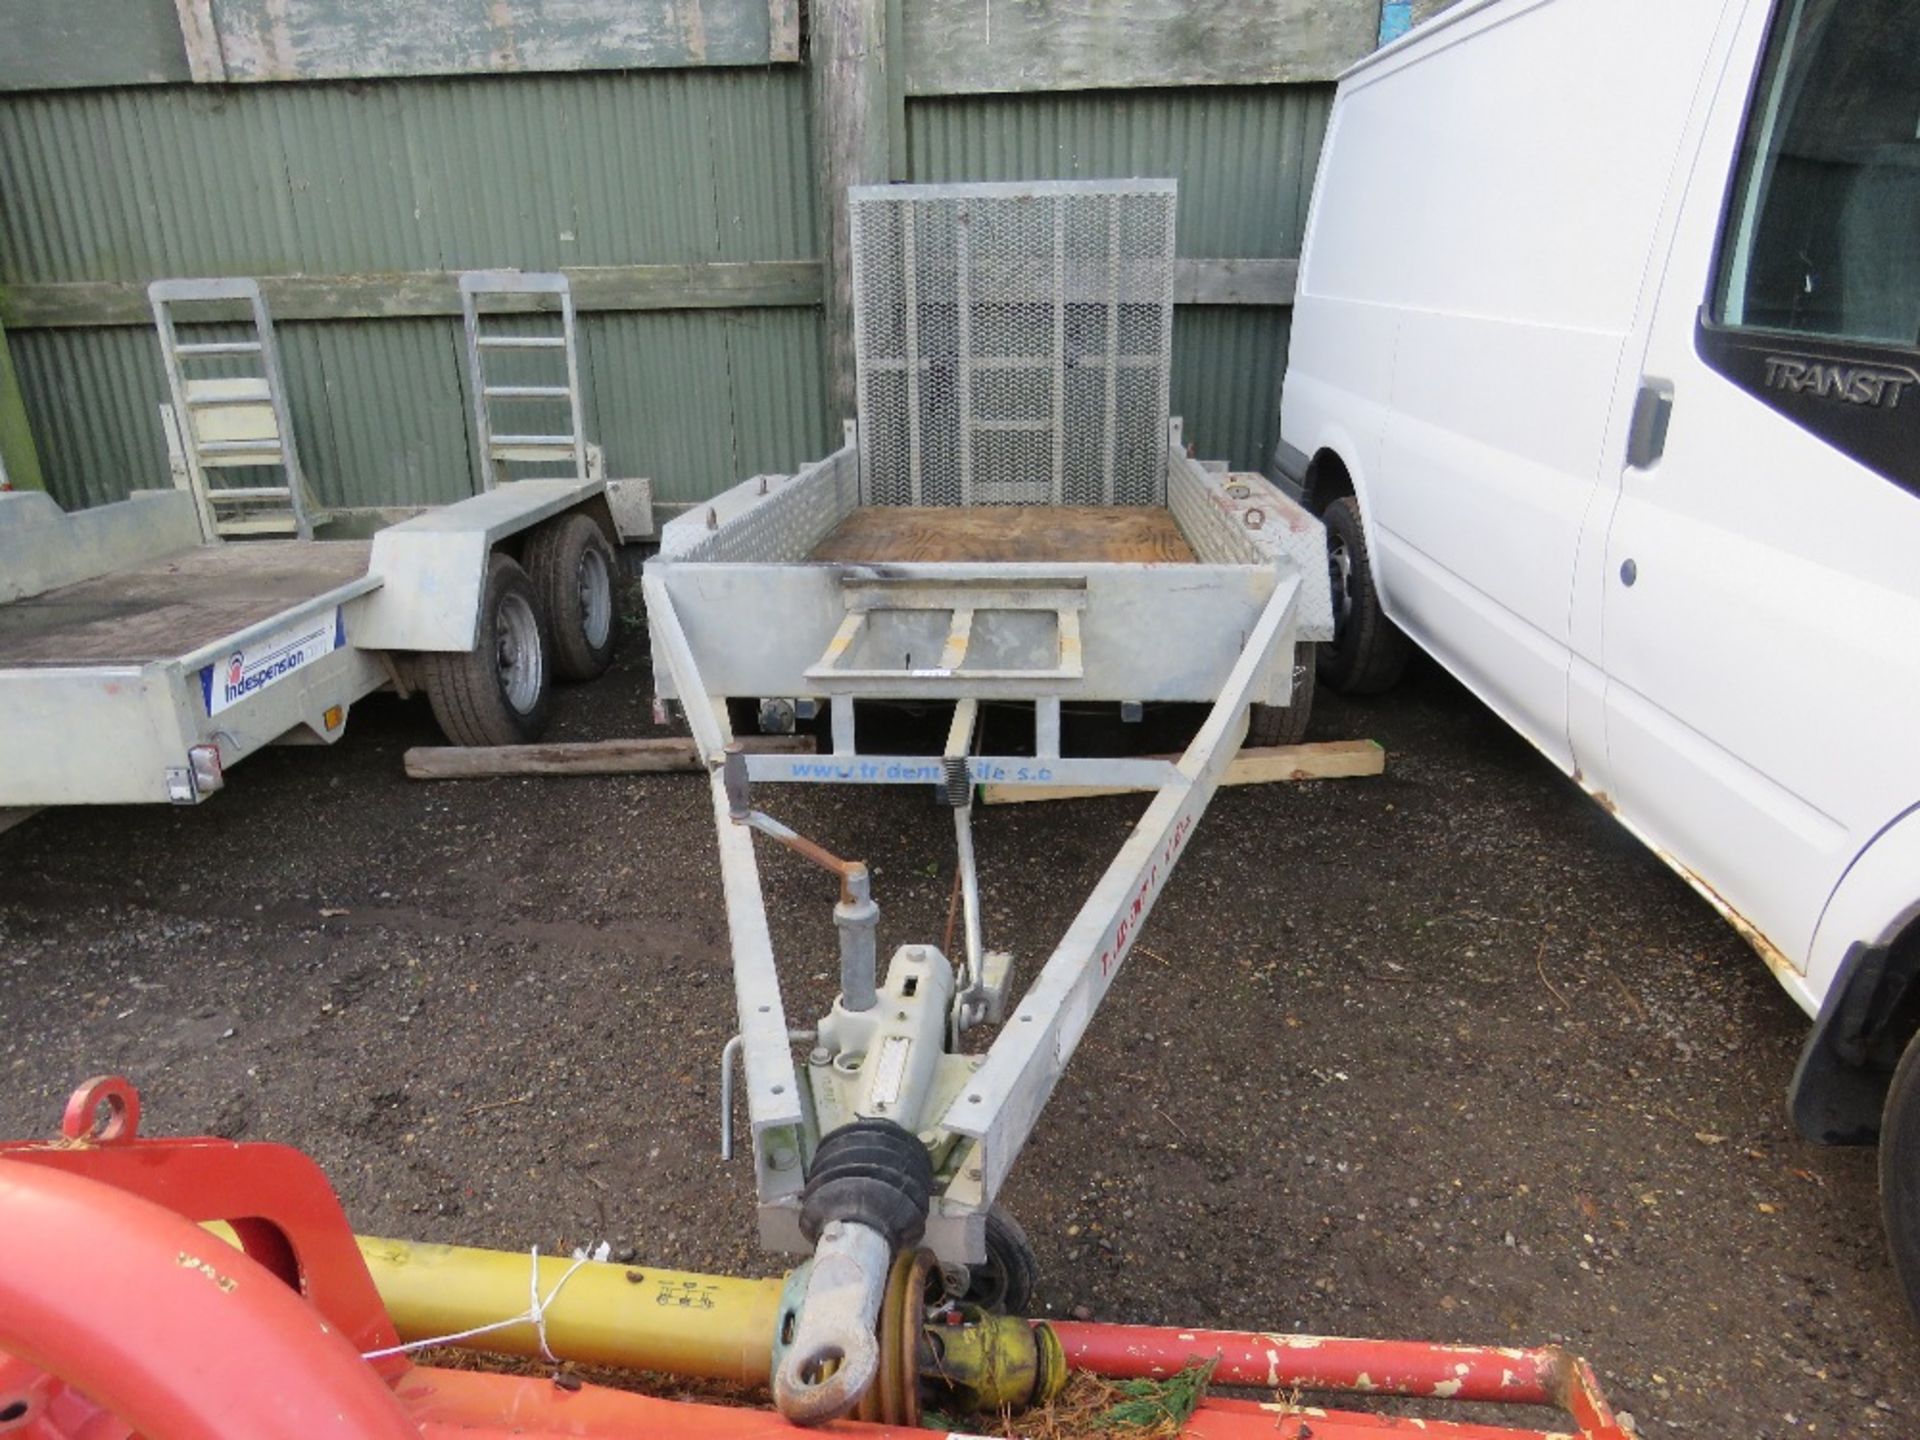 TRIDENT TWIN AXLED MINI DIGGER PLANT TRAILER. REAR RAMP. ID:087417. 8FT X 4FT APPROX. DIRECT FROM L